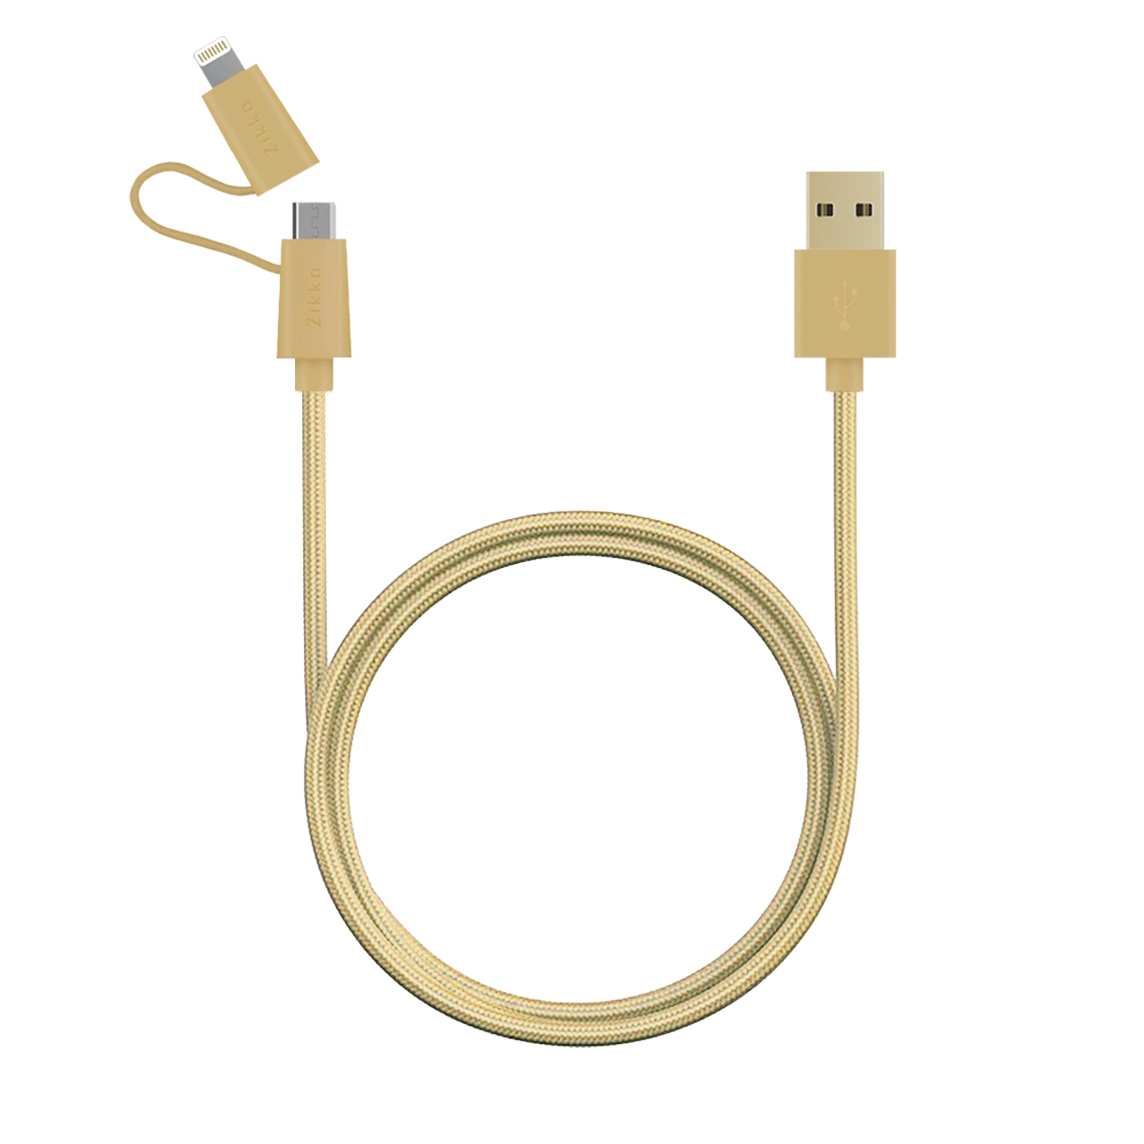 zikko-iphone-lightning-android-micro-usb-cable-sc600-1-5m